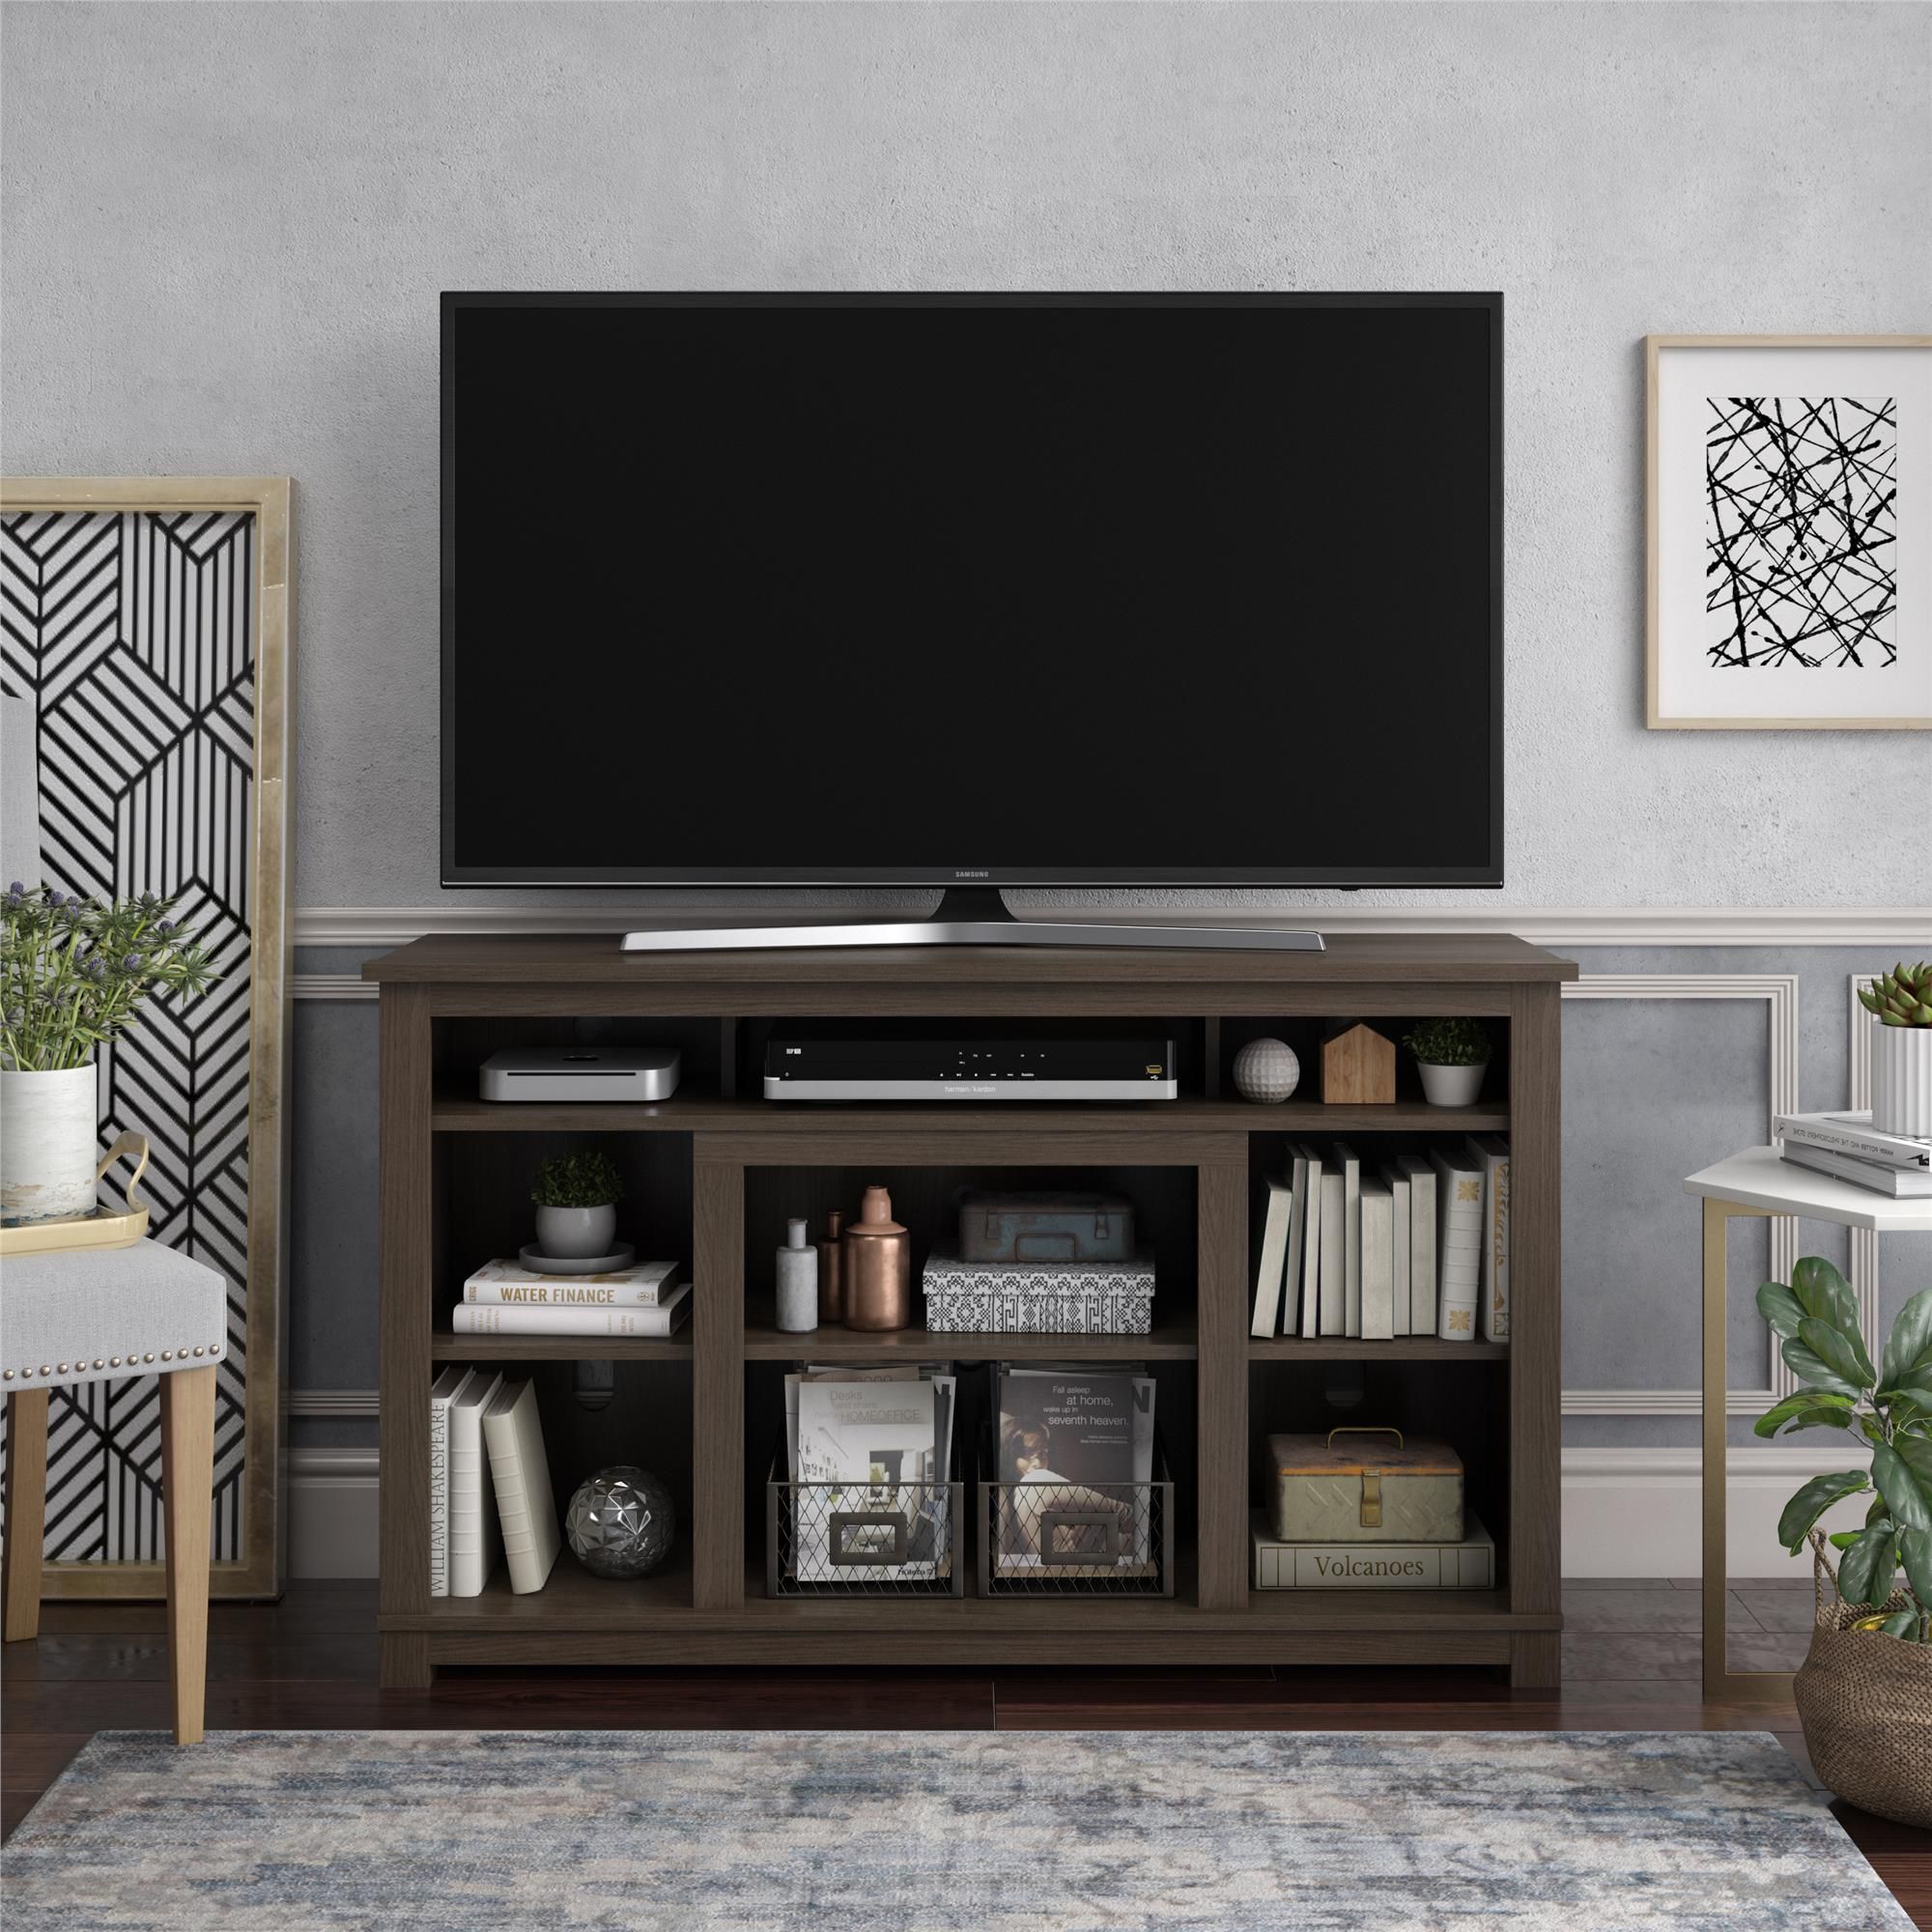 Ameriwood Home Edgewood Tv Stand For Tvs Up To 55 Throughout Spellman Tv Stands For Tvs Up To 55" (Photo 11 of 15)